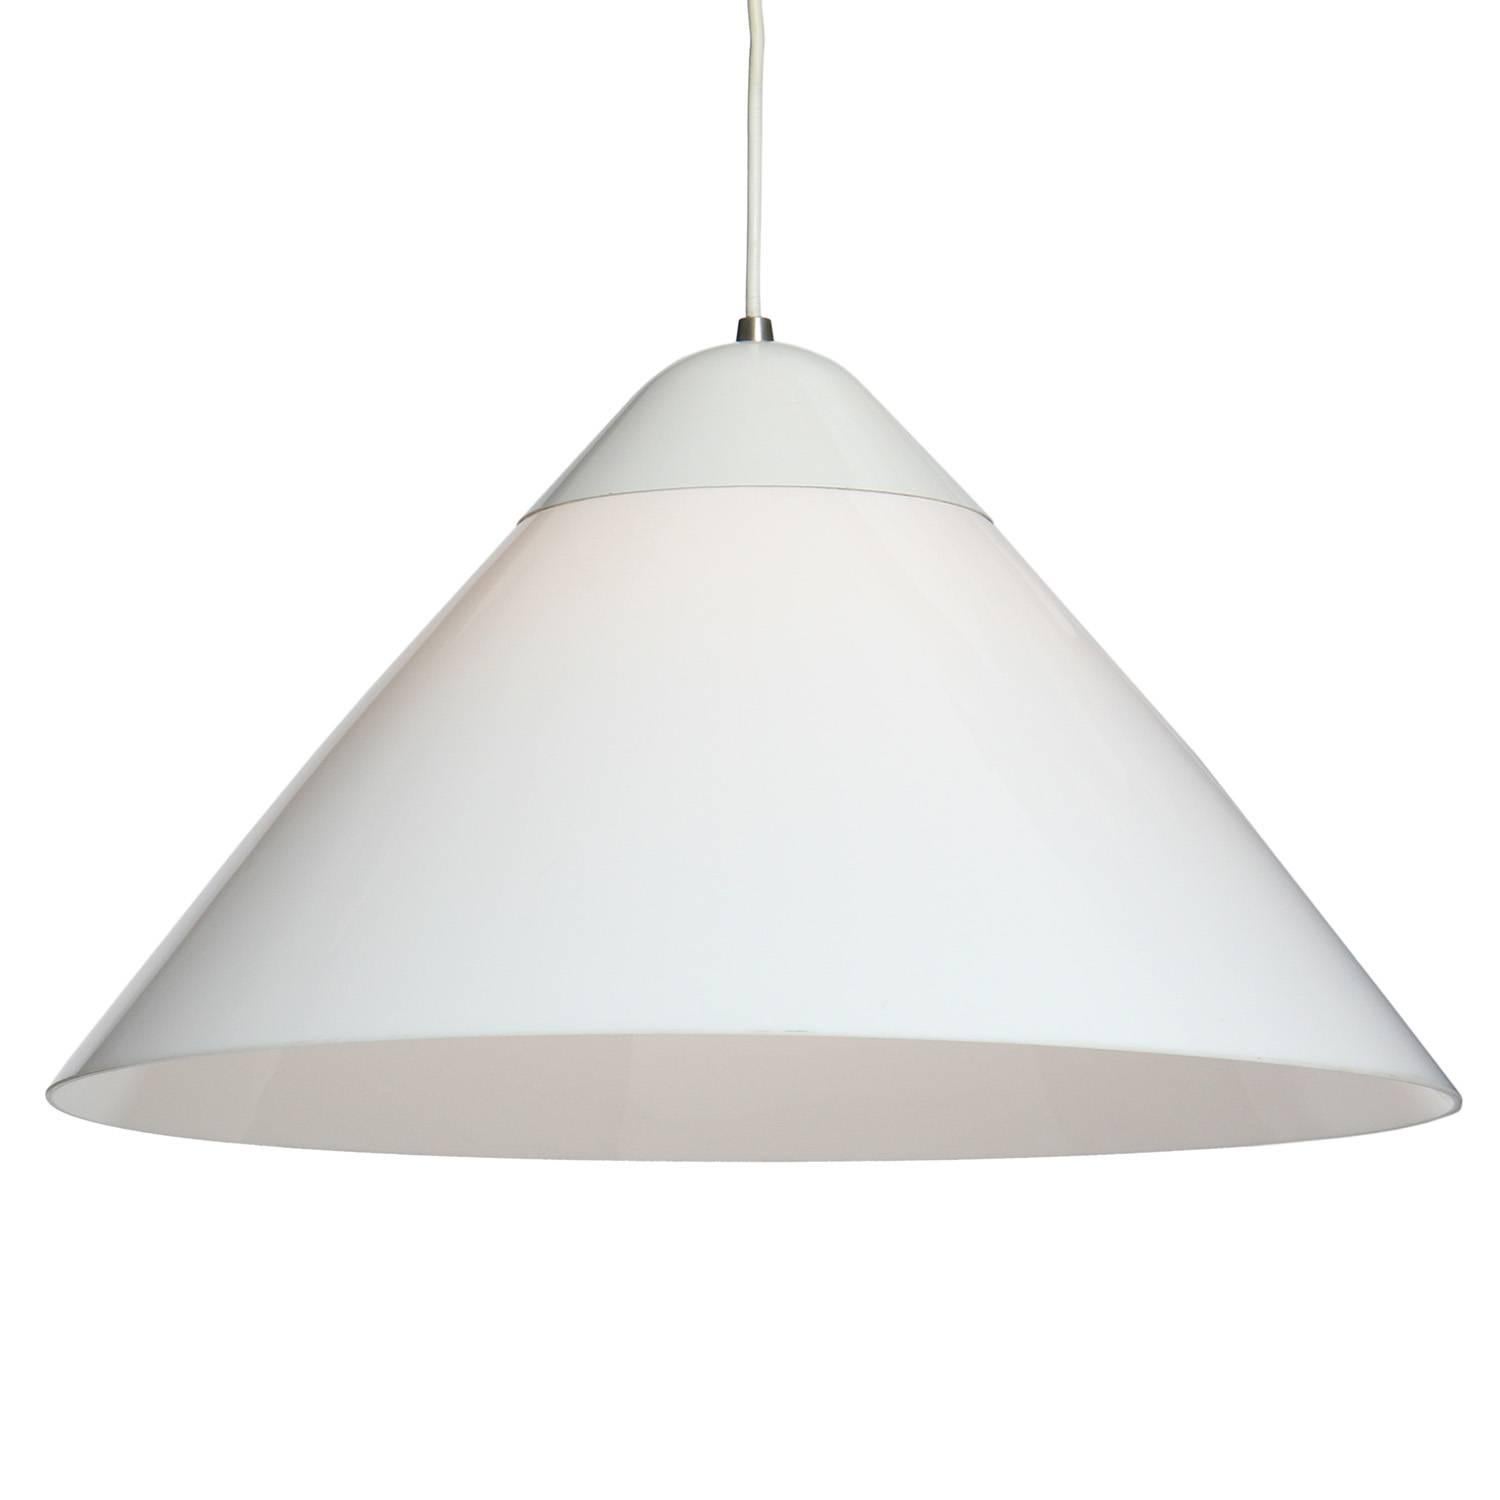 A simple and well scaled pendant lamp having and acrylic shade that continues from a white metal cap.